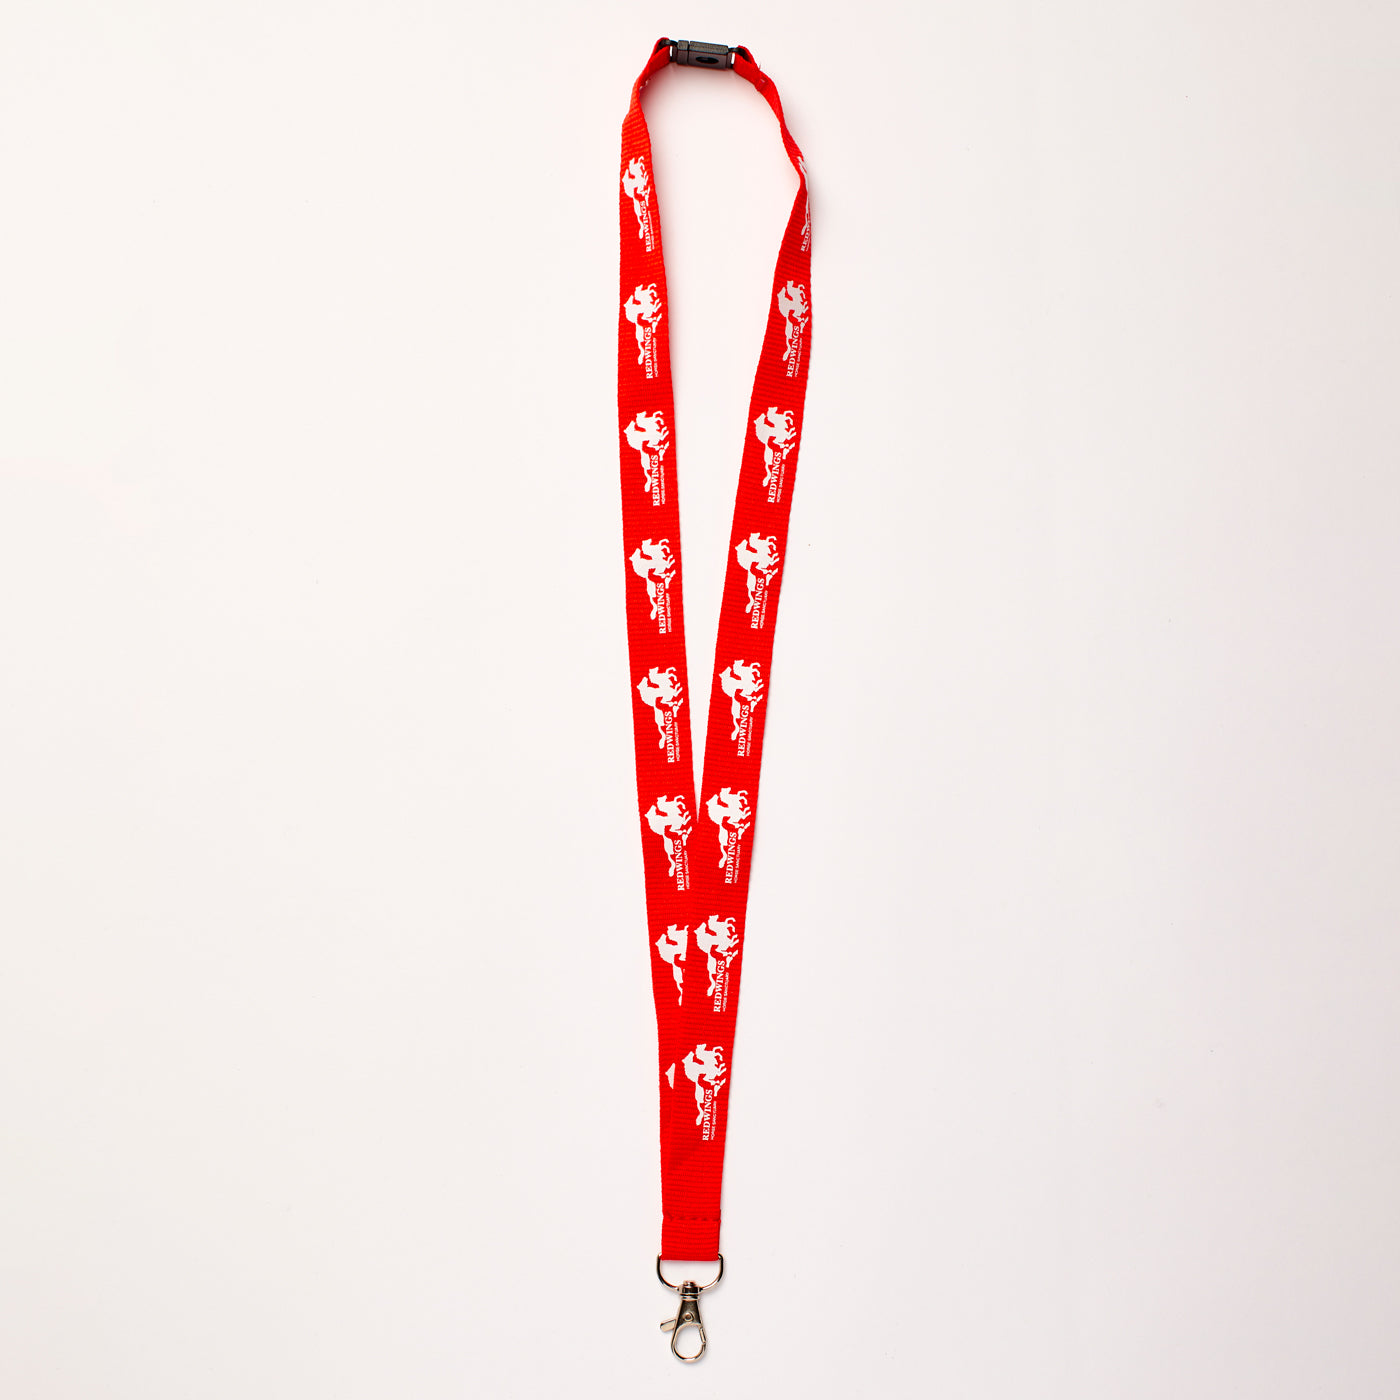 Image shows a red lanyard with our white Redwings logo printed continuiously all the way round